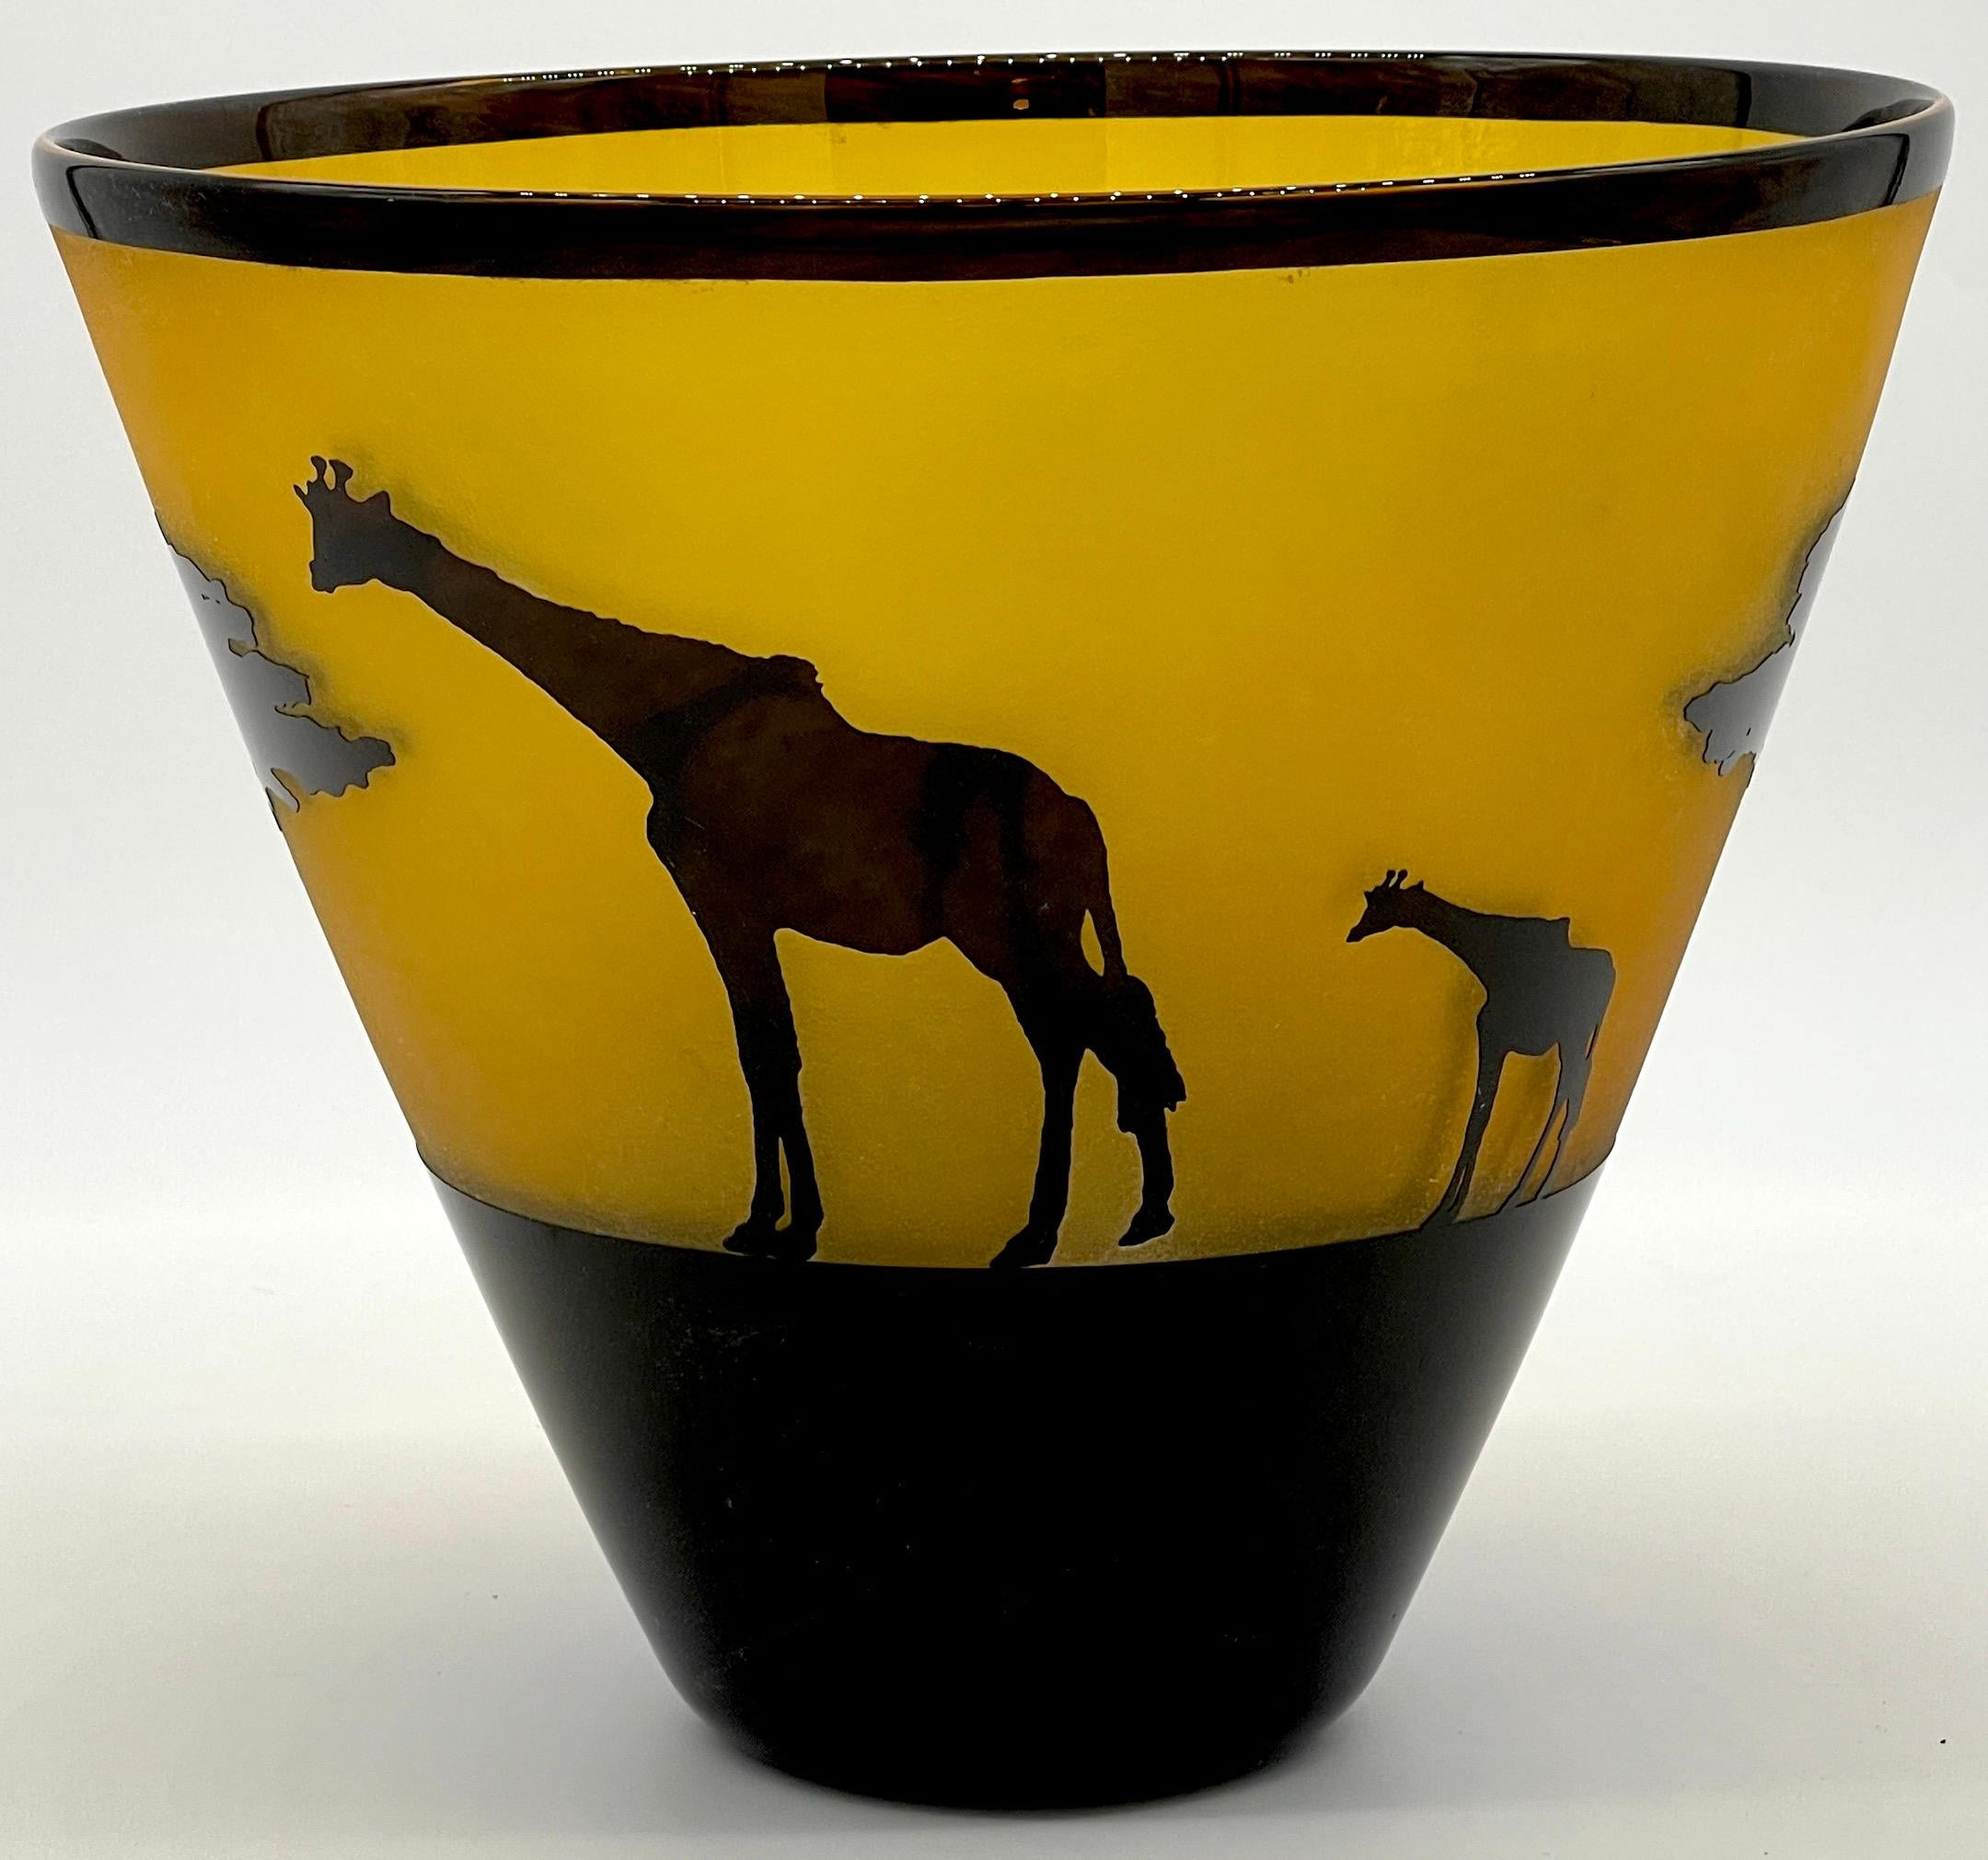 Art Glass African Landscape Cameo Glass Vase by Steven Correia, 1986 Edition of #168/500